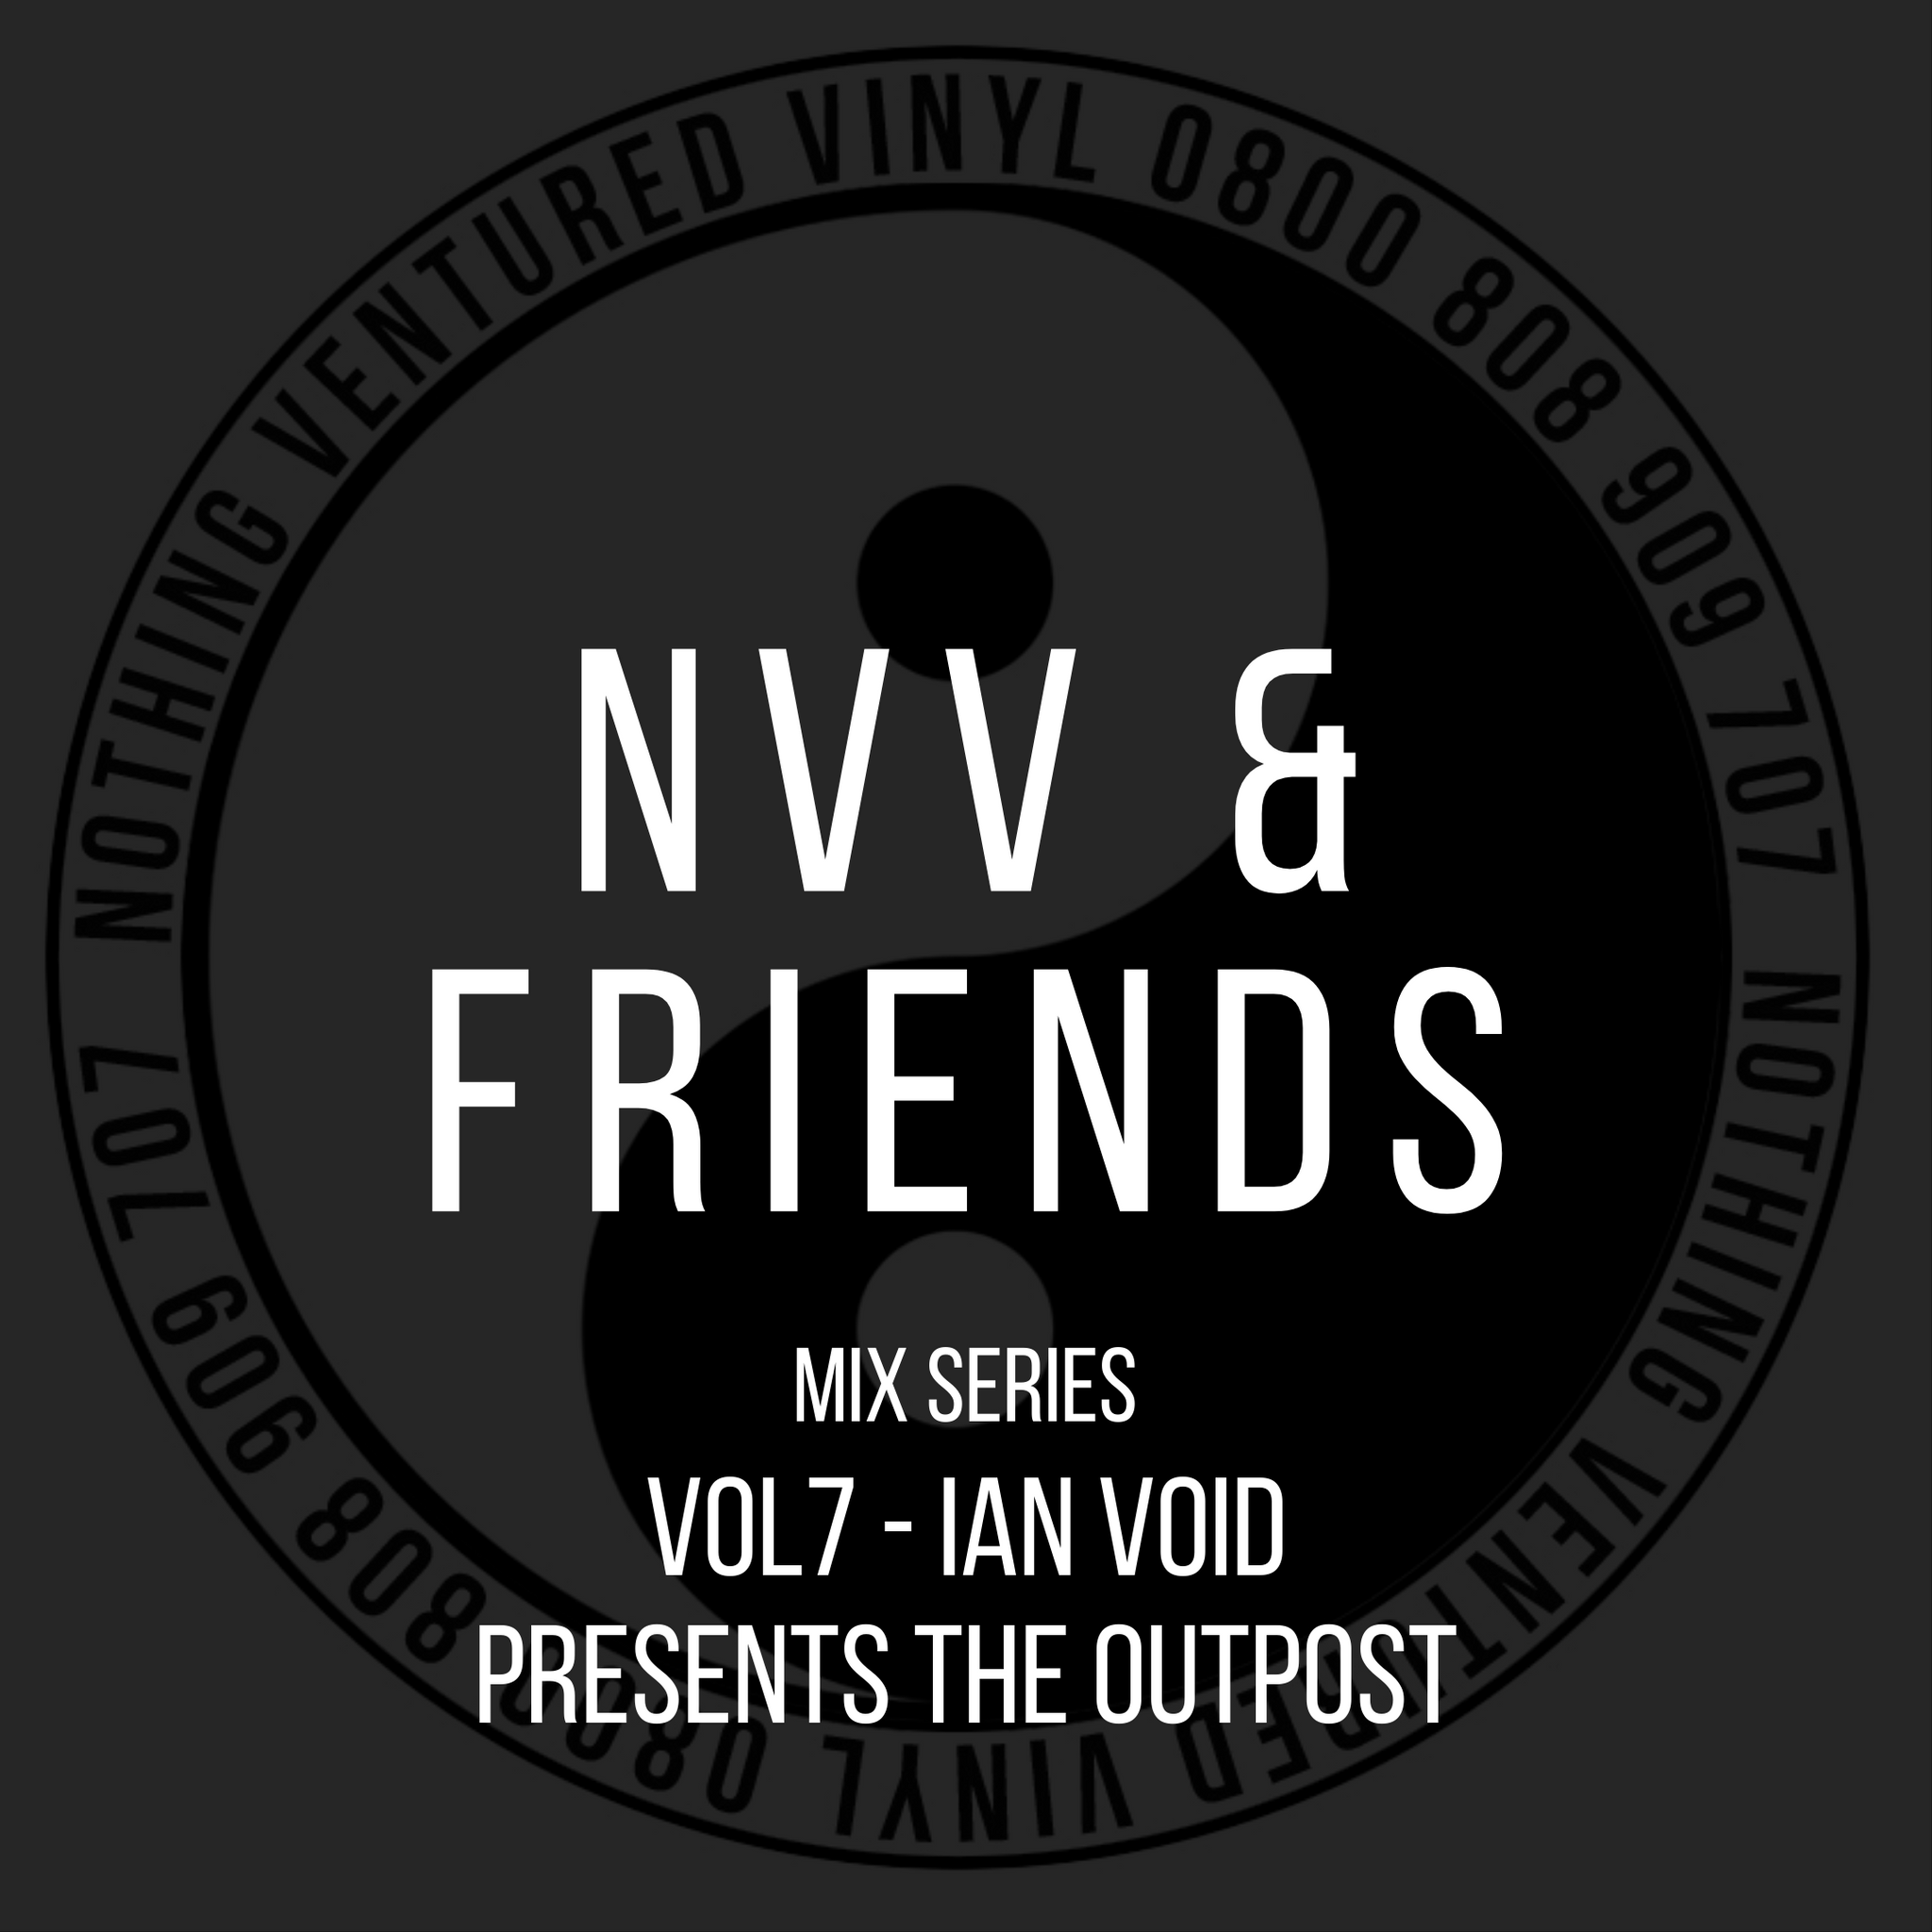 NVV & FRIENDS VOL7 - IAN VOID PRESENTS THE OUTPOST